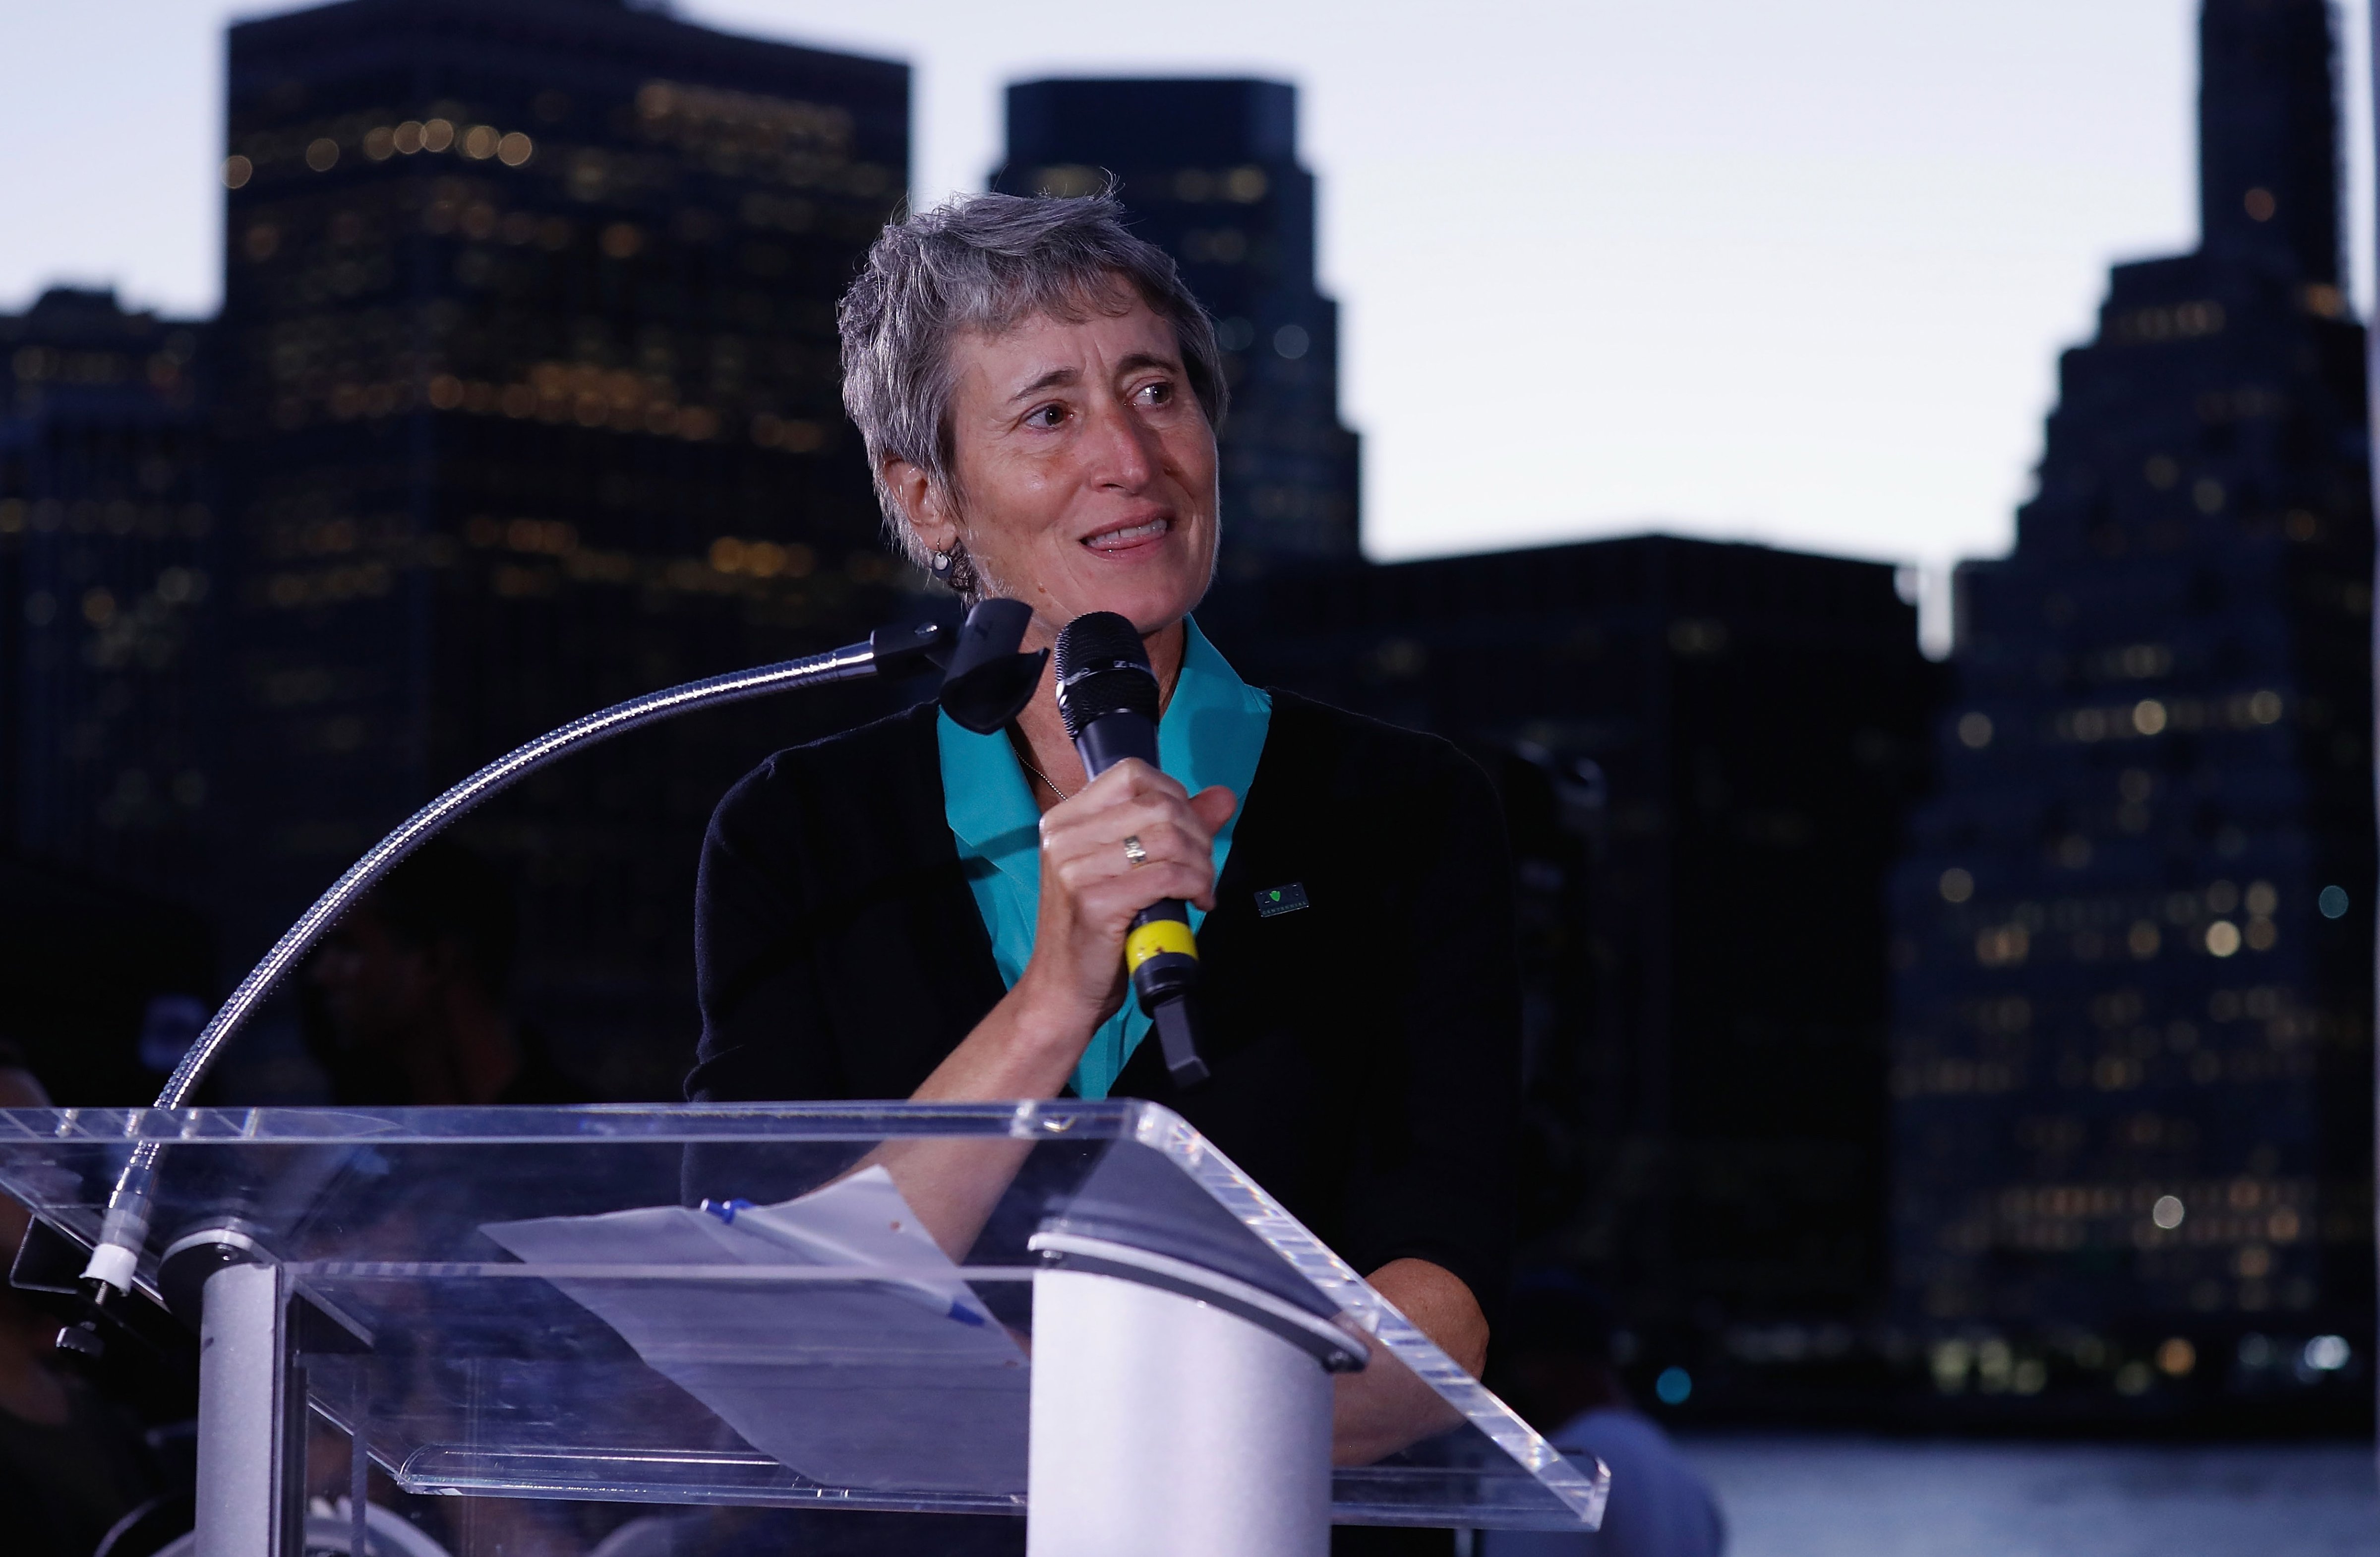 US Secretary of the Interior, Sally Jewell   attends the 100th Birthday of the National Park Service celebration at Brooklyn Bridge Park on Aug. 22, 2016 in New York City. (John Lamparski—WireImage)